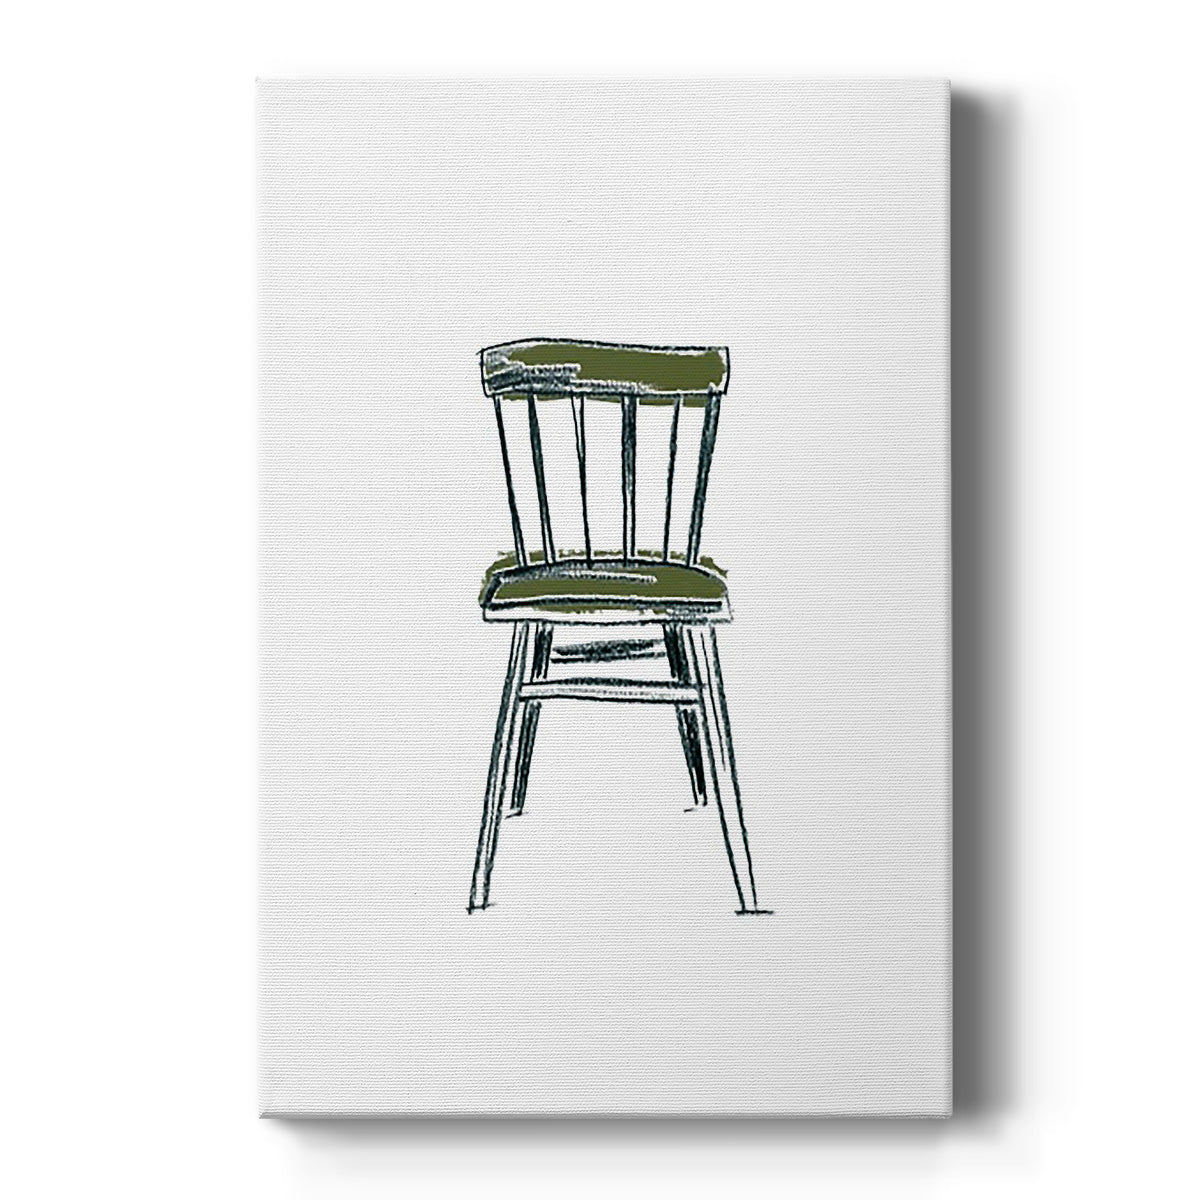 Take a Seat IV Premium Gallery Wrapped Canvas - Ready to Hang